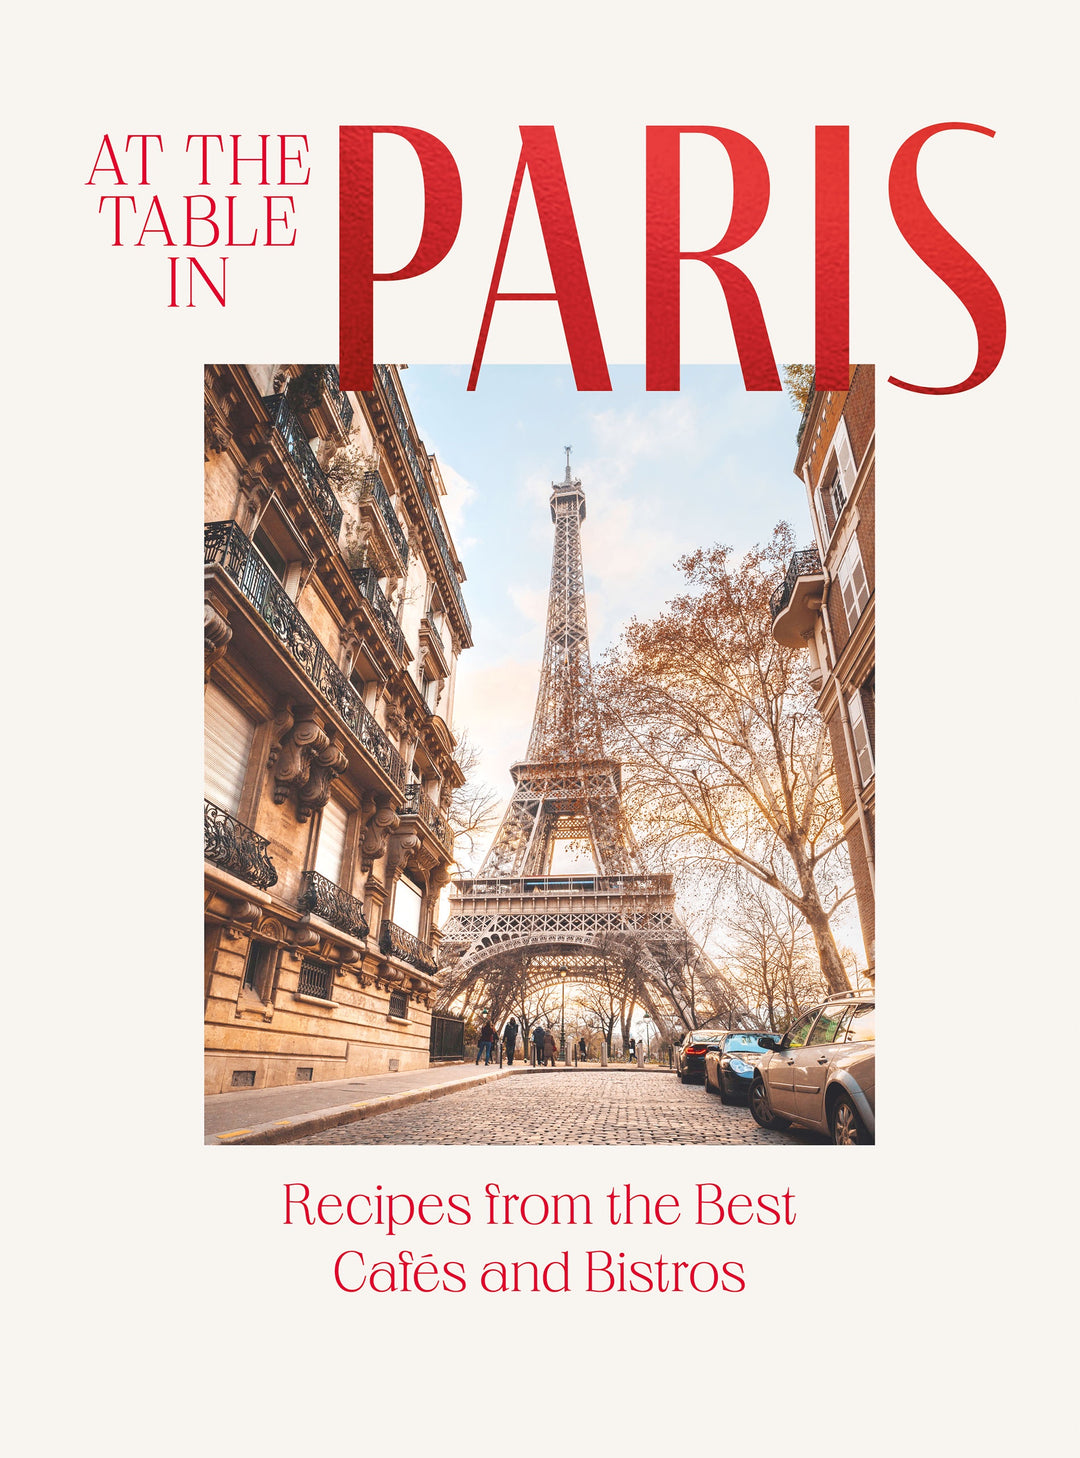 At The Table In Paris by Jan Thorbecke Verlag